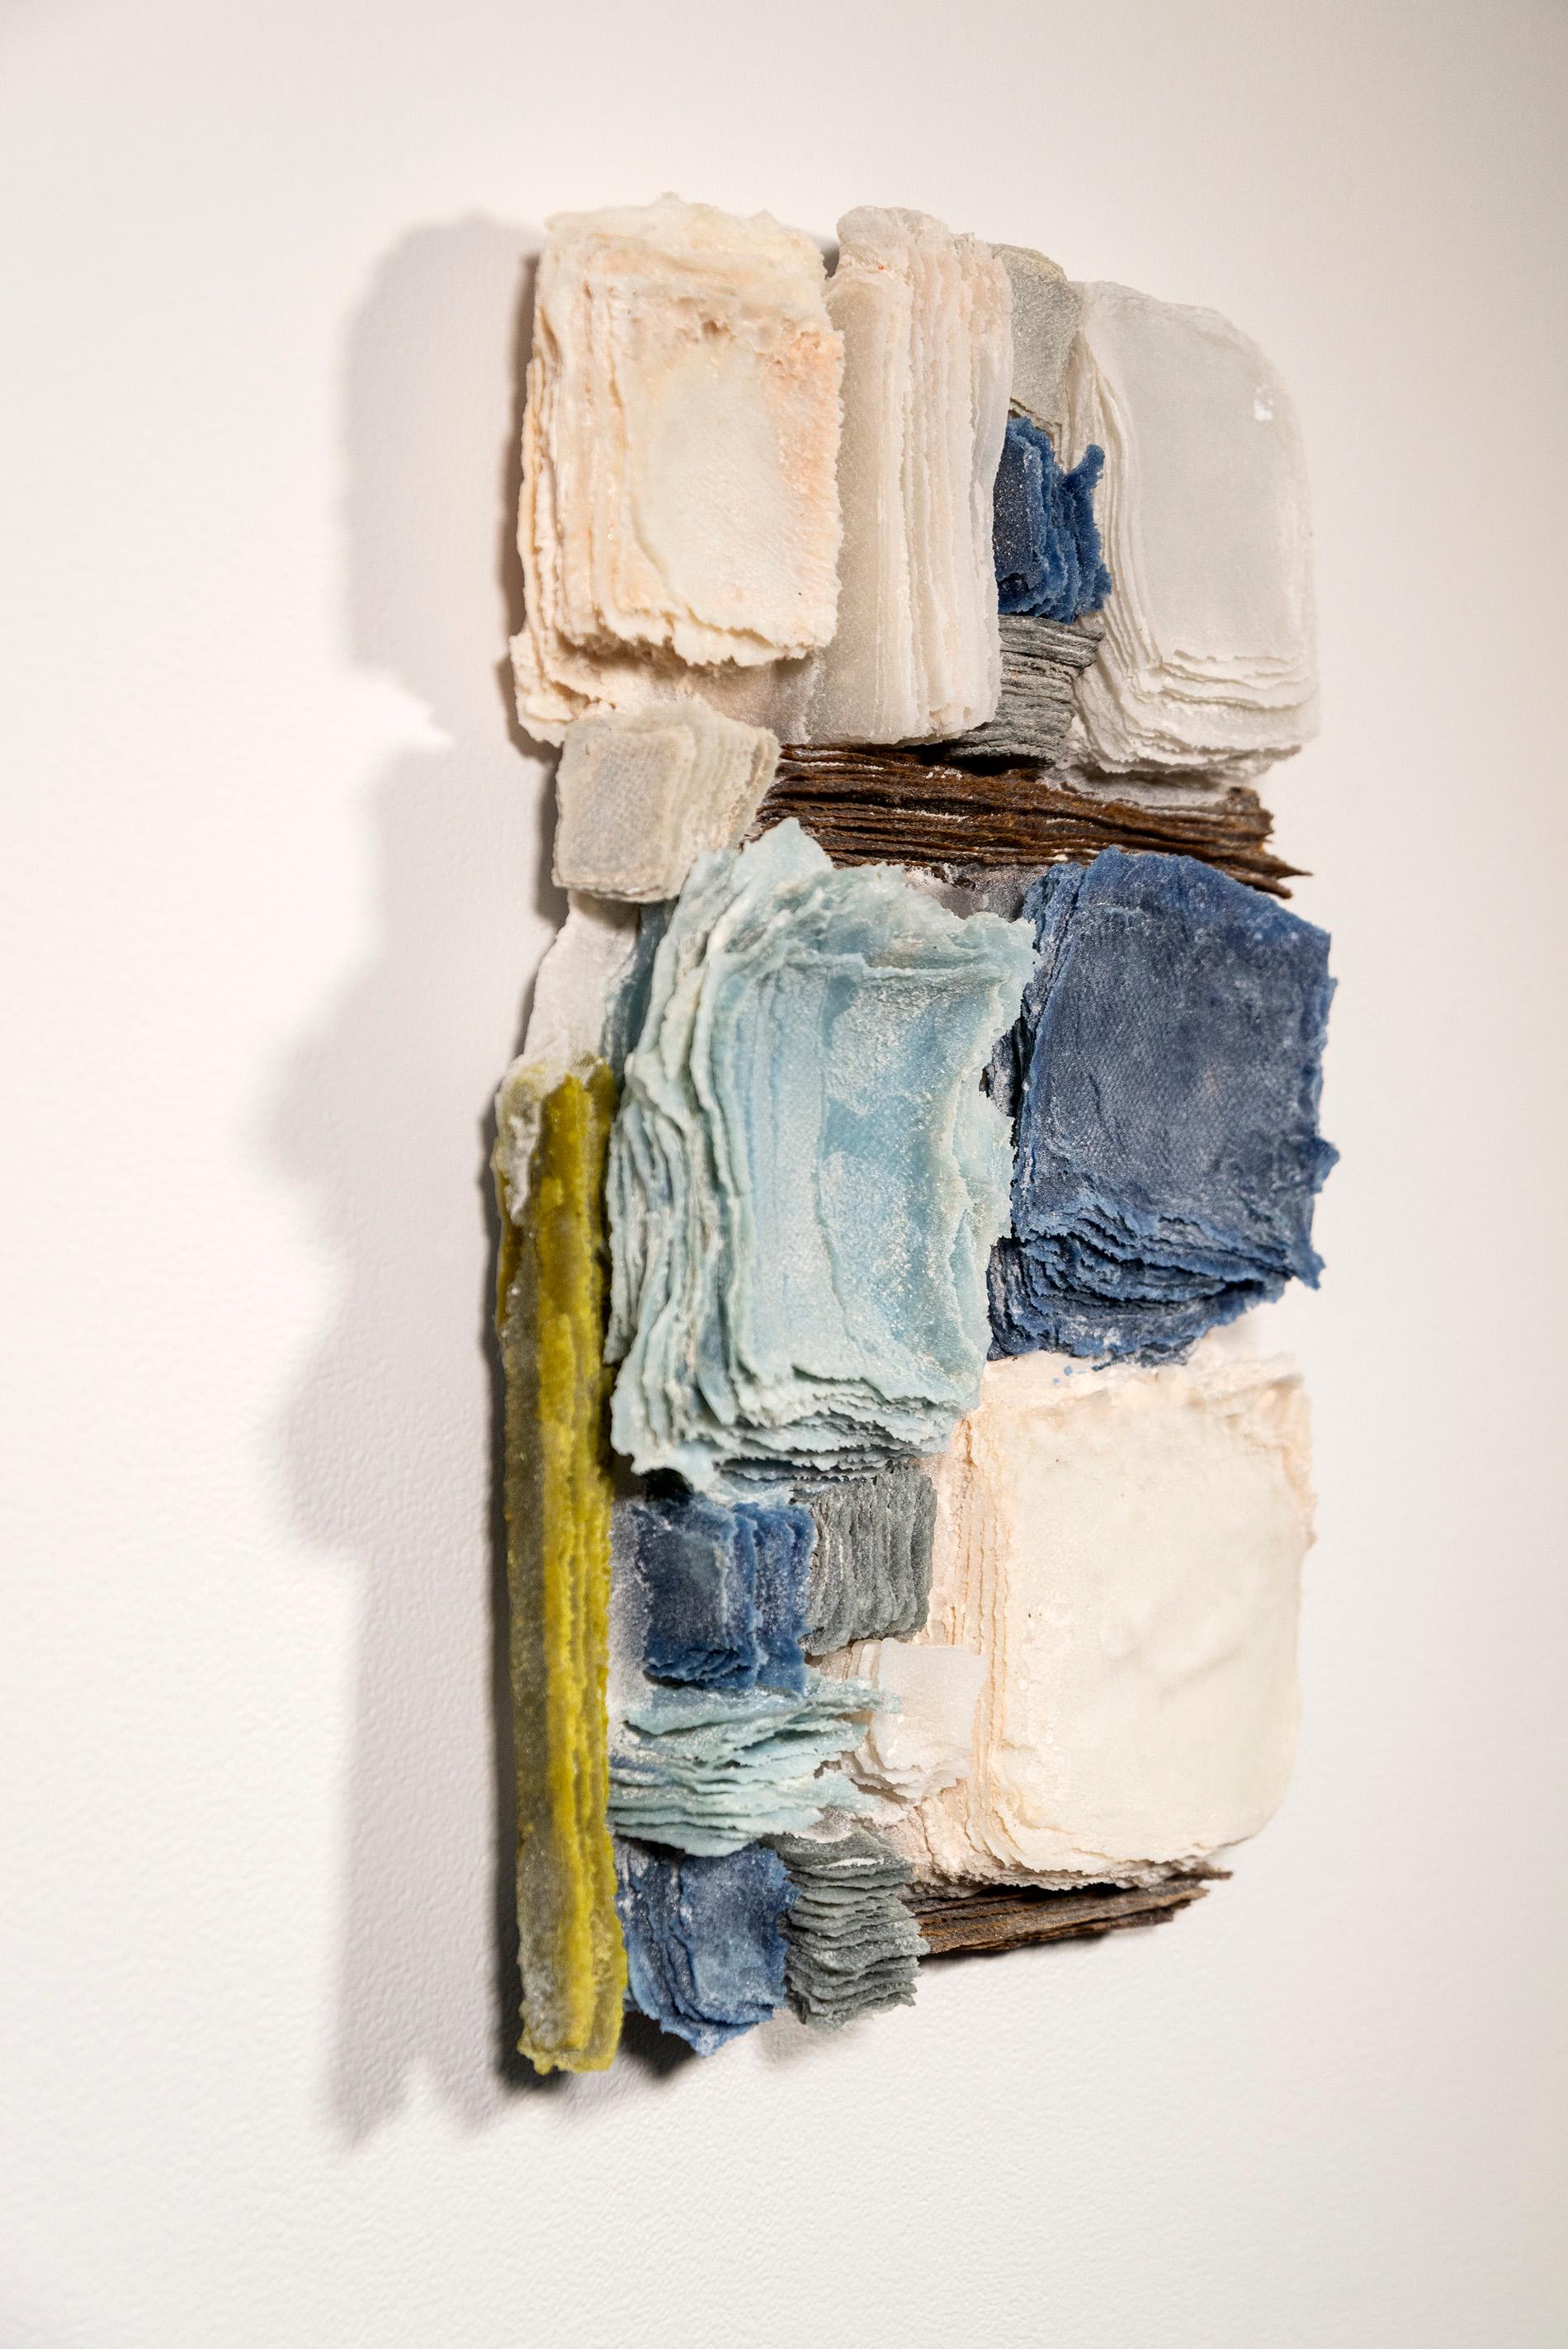 Pieced - grey, blue, white, textured, layered glass, wall relief, sculpture - Sculpture by Cheryl Wilson Smith